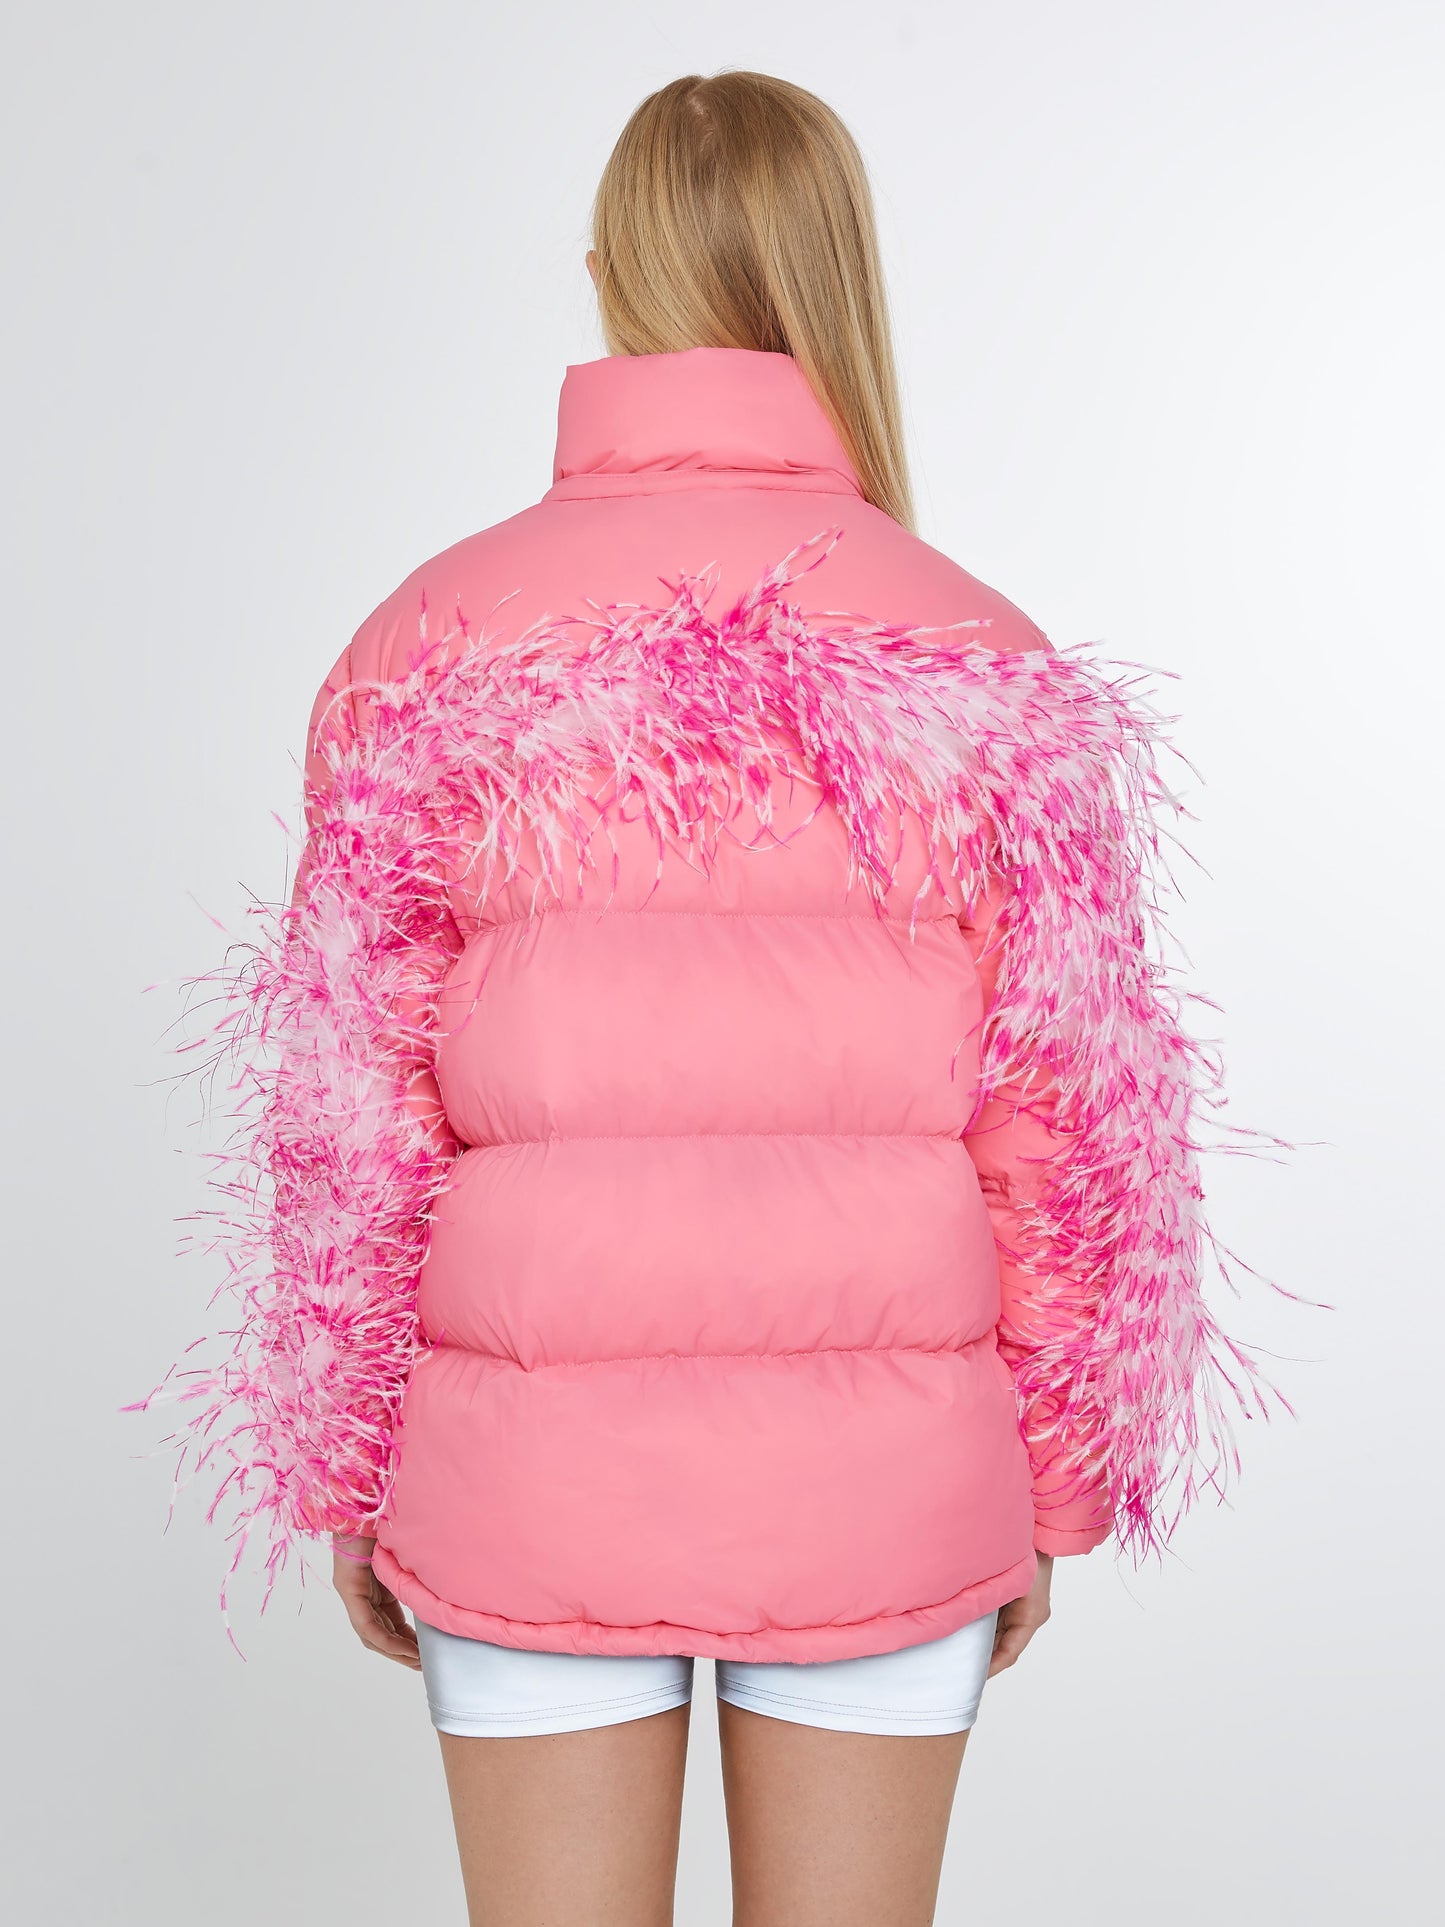 Pink puffer jacket with pink and white feathers